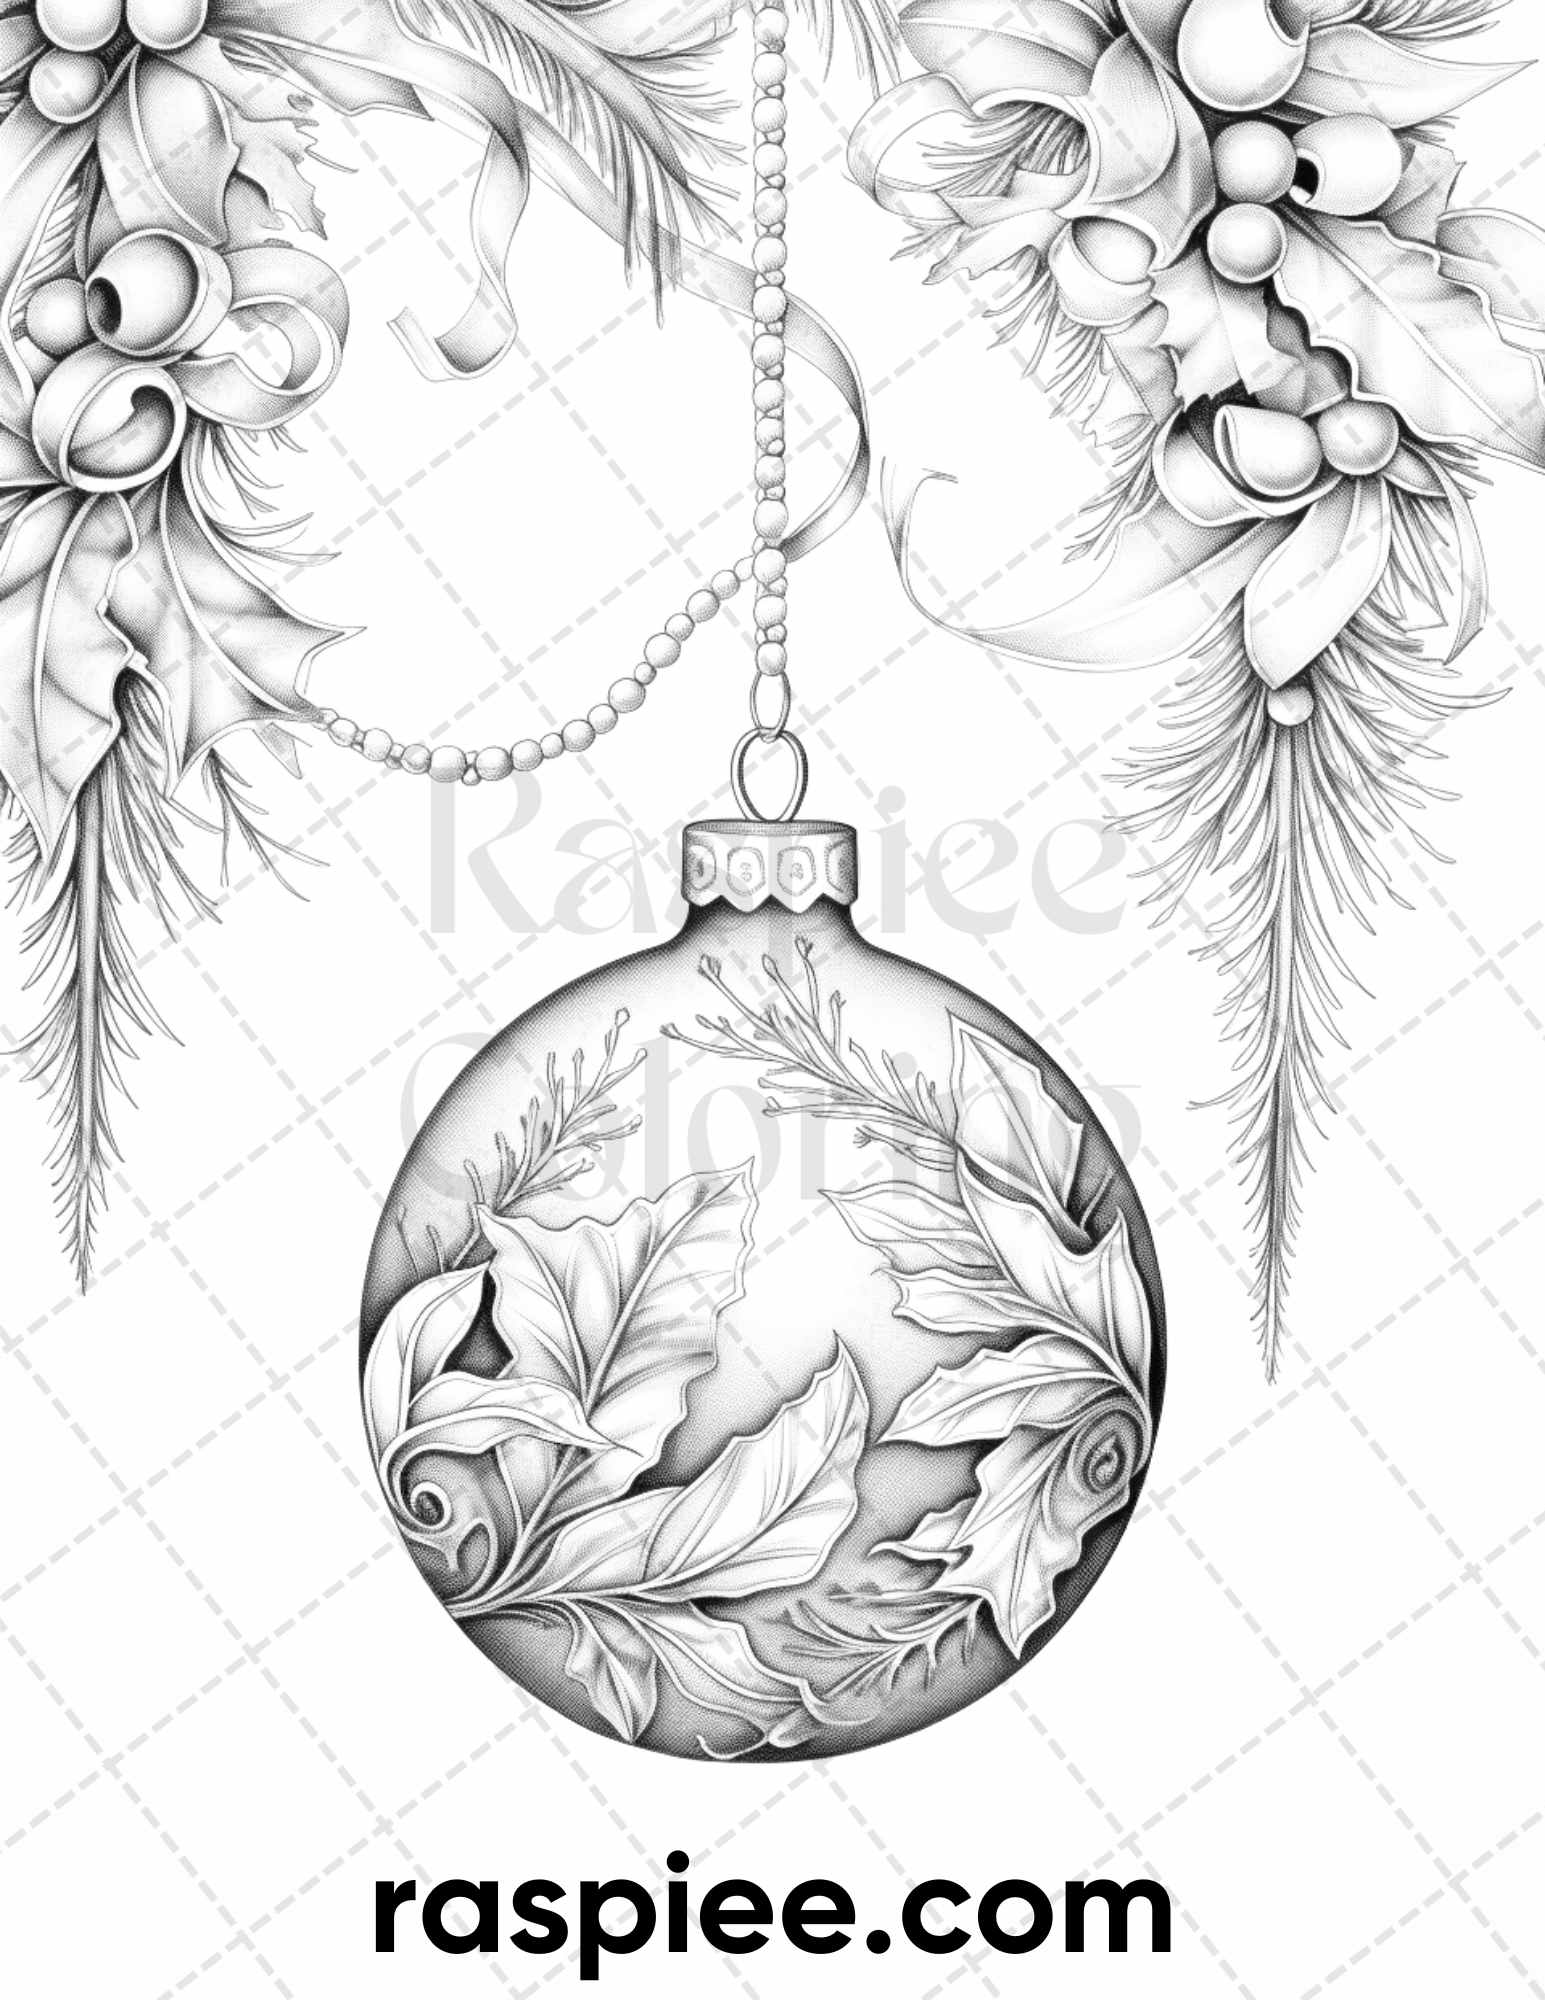 Christmas Balls Coloring Pages for Adults, Relaxing Adult Coloring Sheets, Stress-Relief Coloring, Seasonal Coloring Activities, High-Quality Coloring Pages, High-Quality Coloring Pages, Holiday Coloring Fun, Christmas Coloring Pages, Xmas Coloring Pages, Winter Coloring Pages, Holiday Coloring Pages